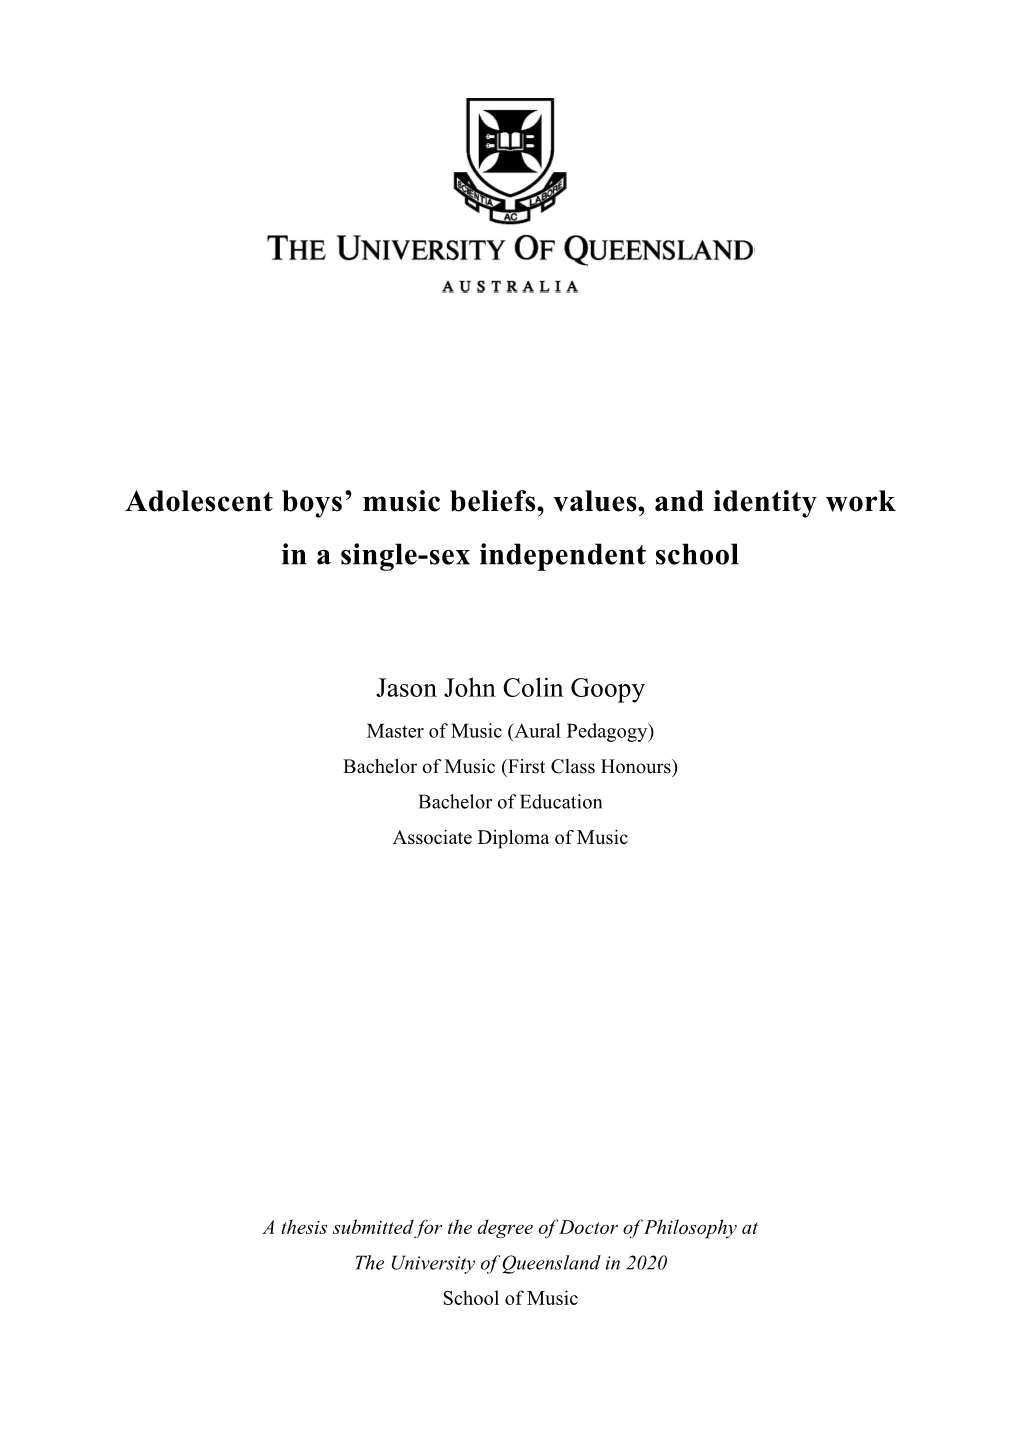 Goopy, J. (2020) Adolescent Boys' Music Beliefs, Values, and Identity